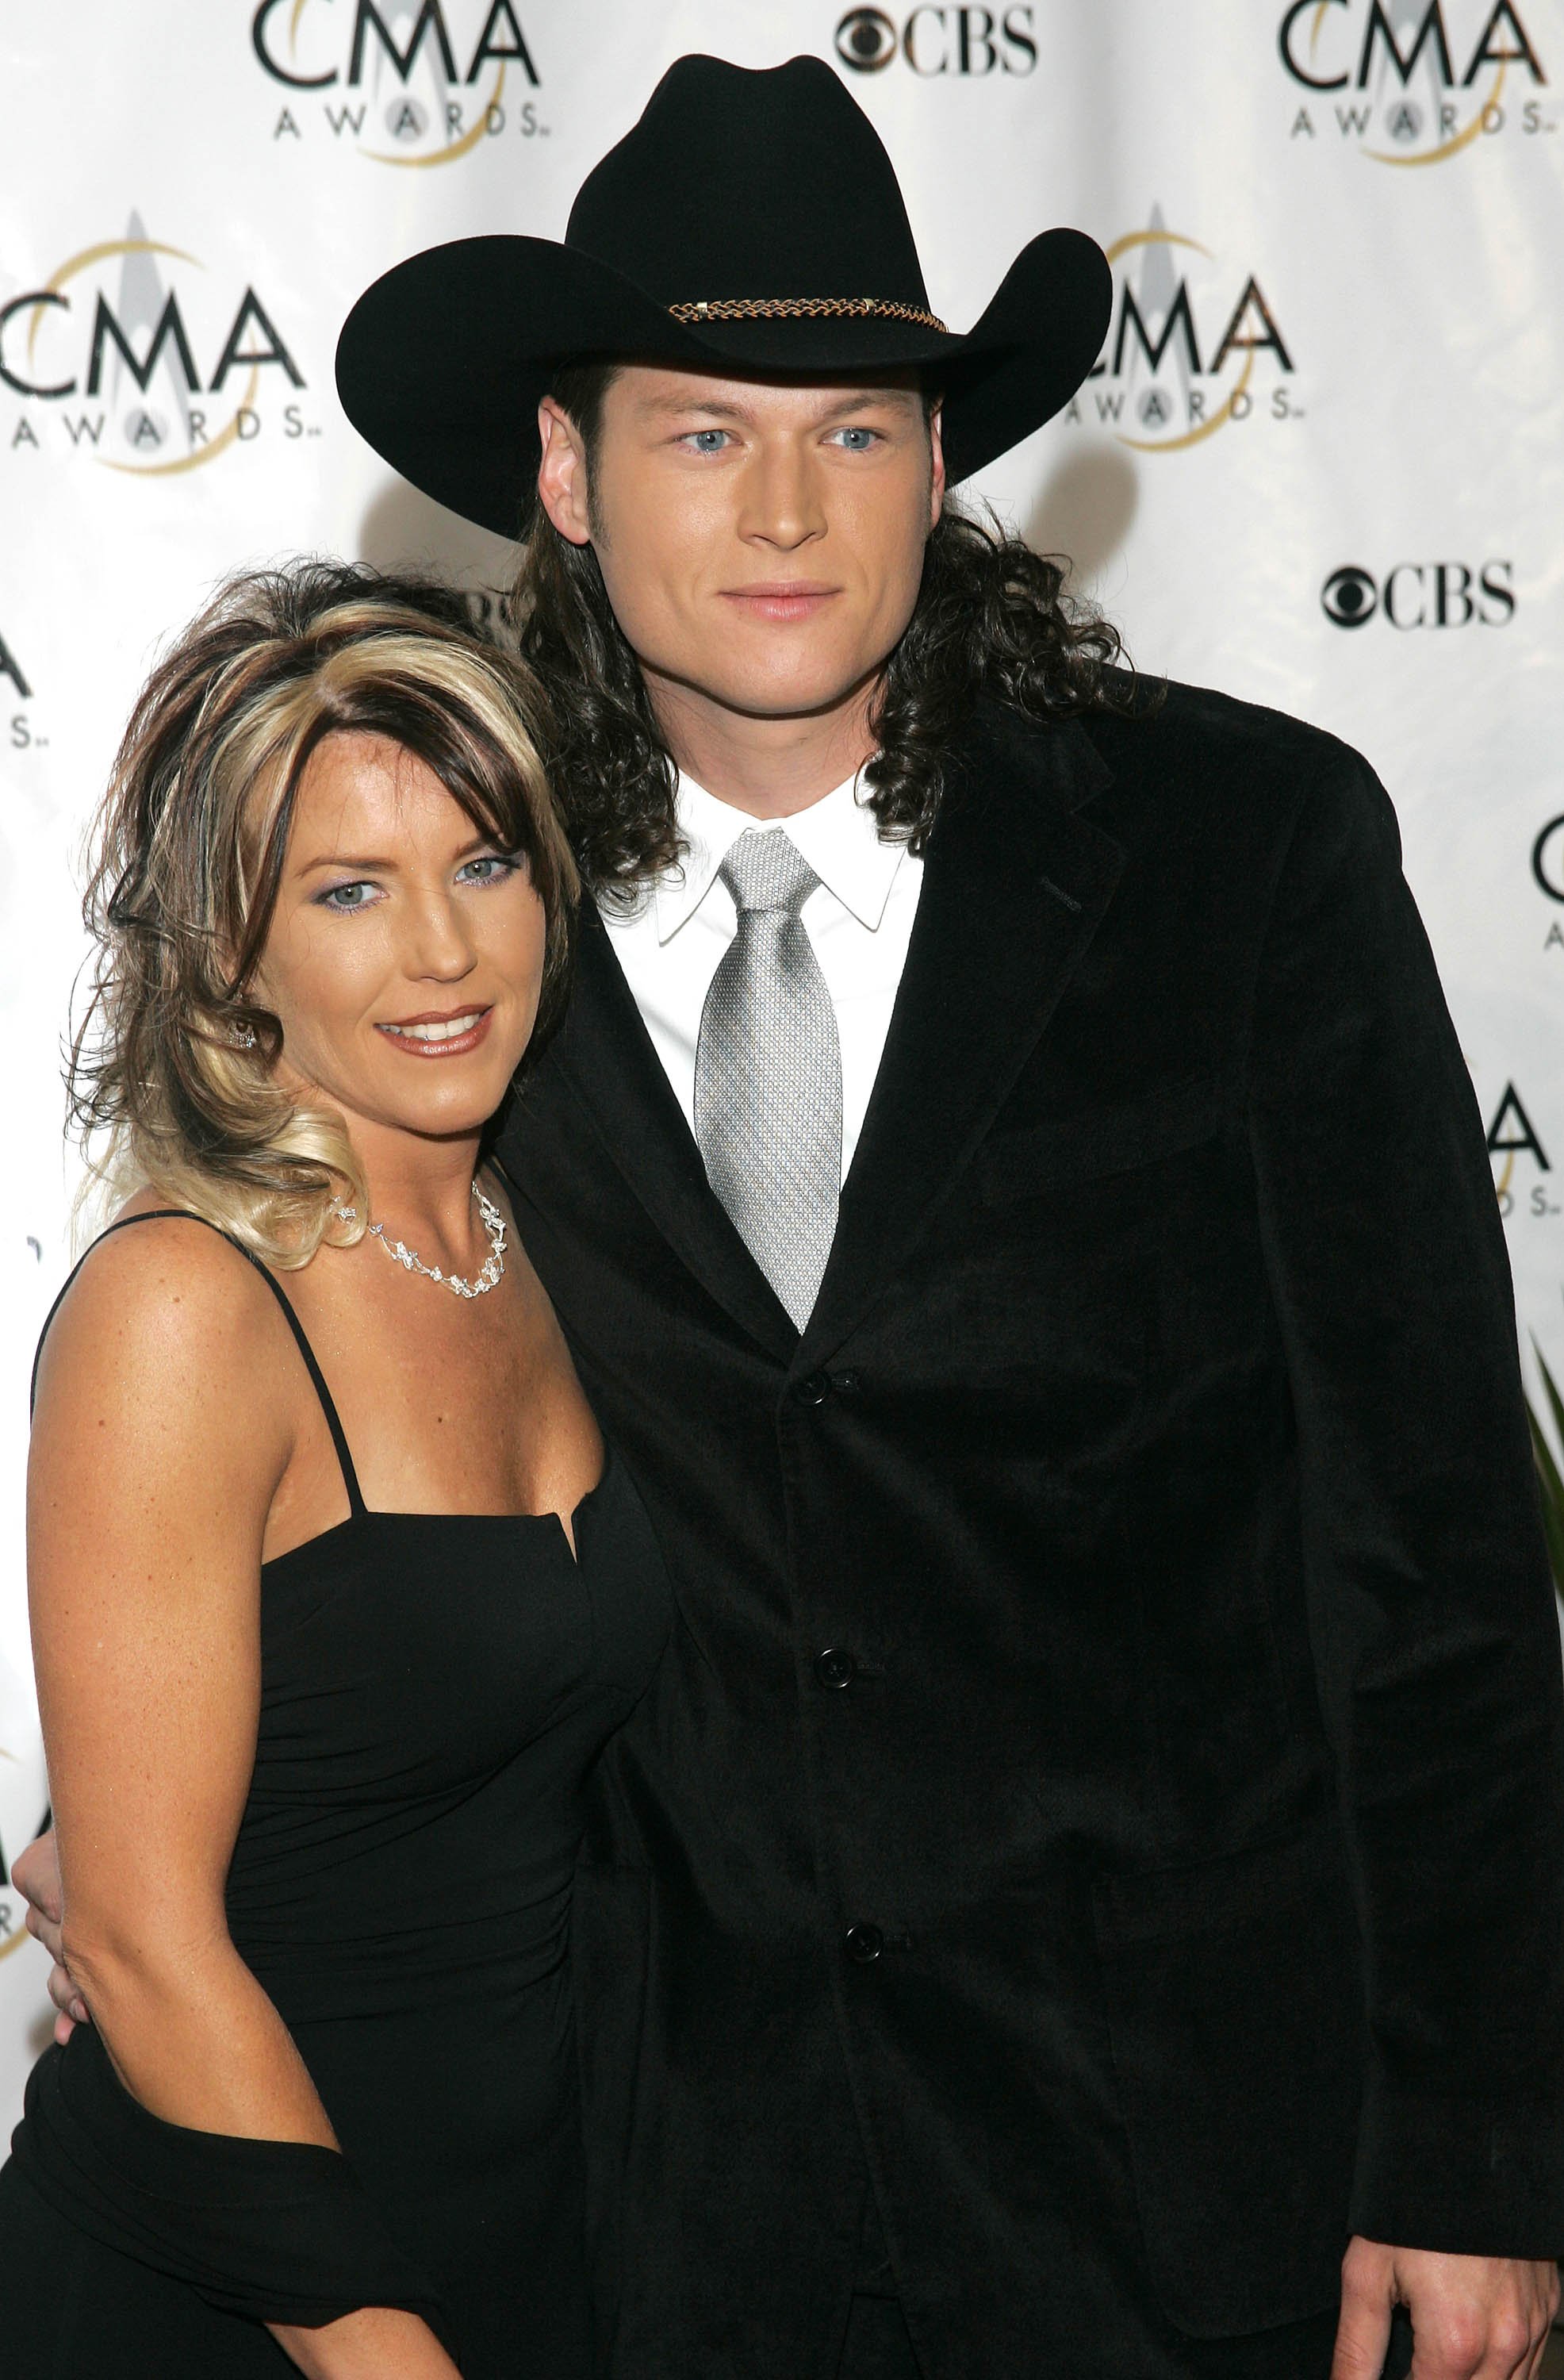 Blake Shelton and his wife Kaynette Shelton arrive at the 38th Annual CMA Awards at the Grand Ole Opry House November 9, 2004 in Nashville, Tennessee. | Source: Getty Images